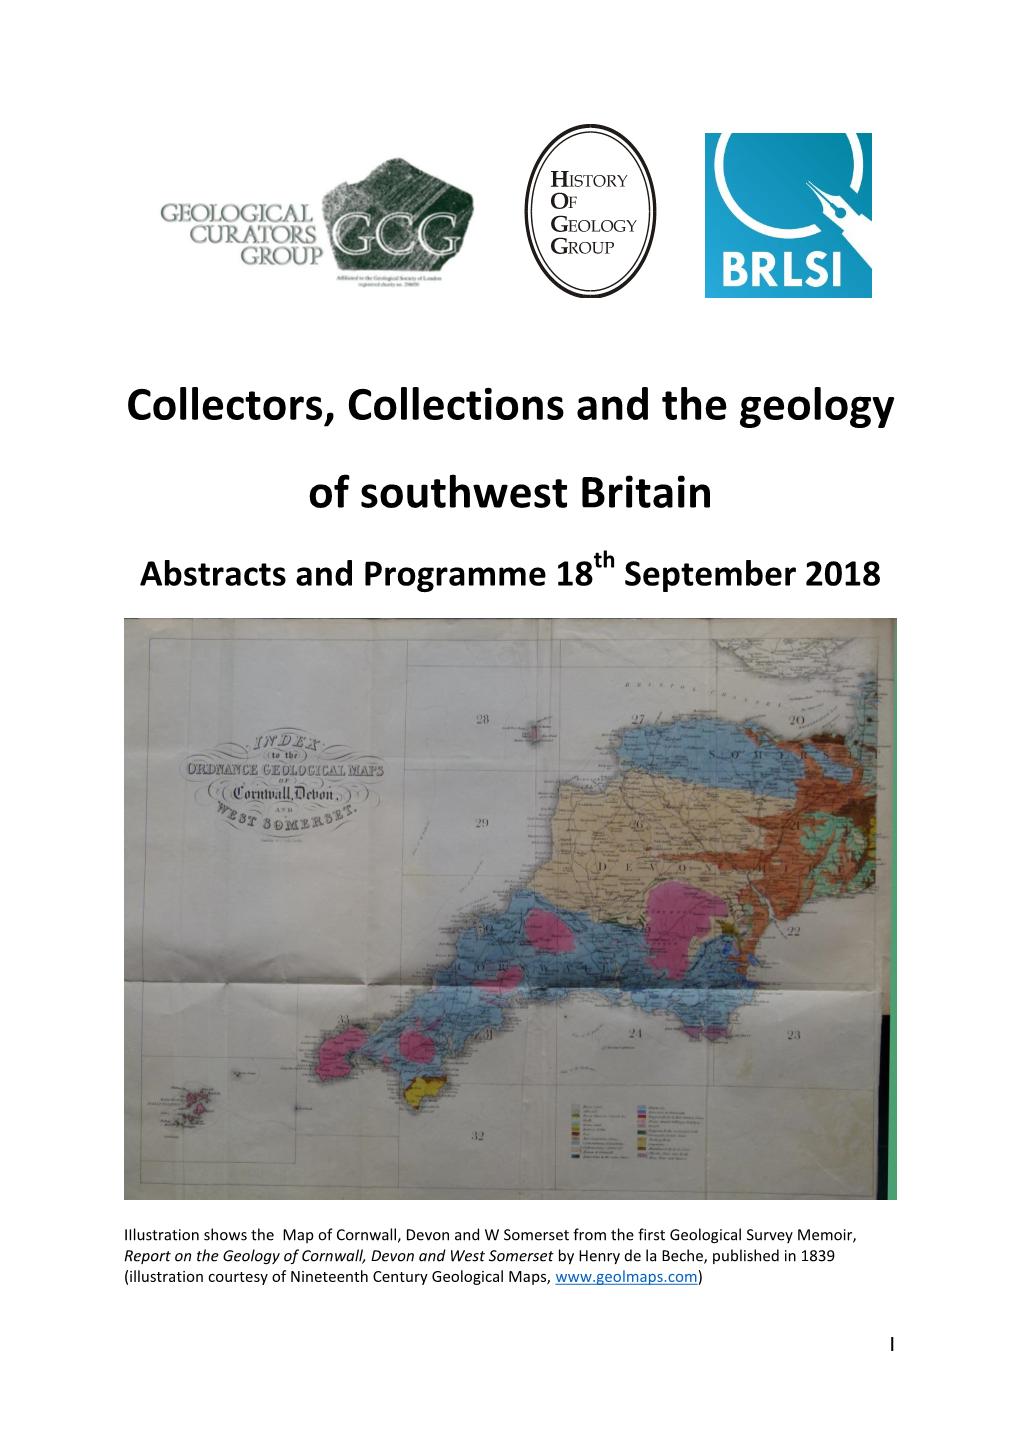 Collectors, Collections and the Geology of Southwest Britain